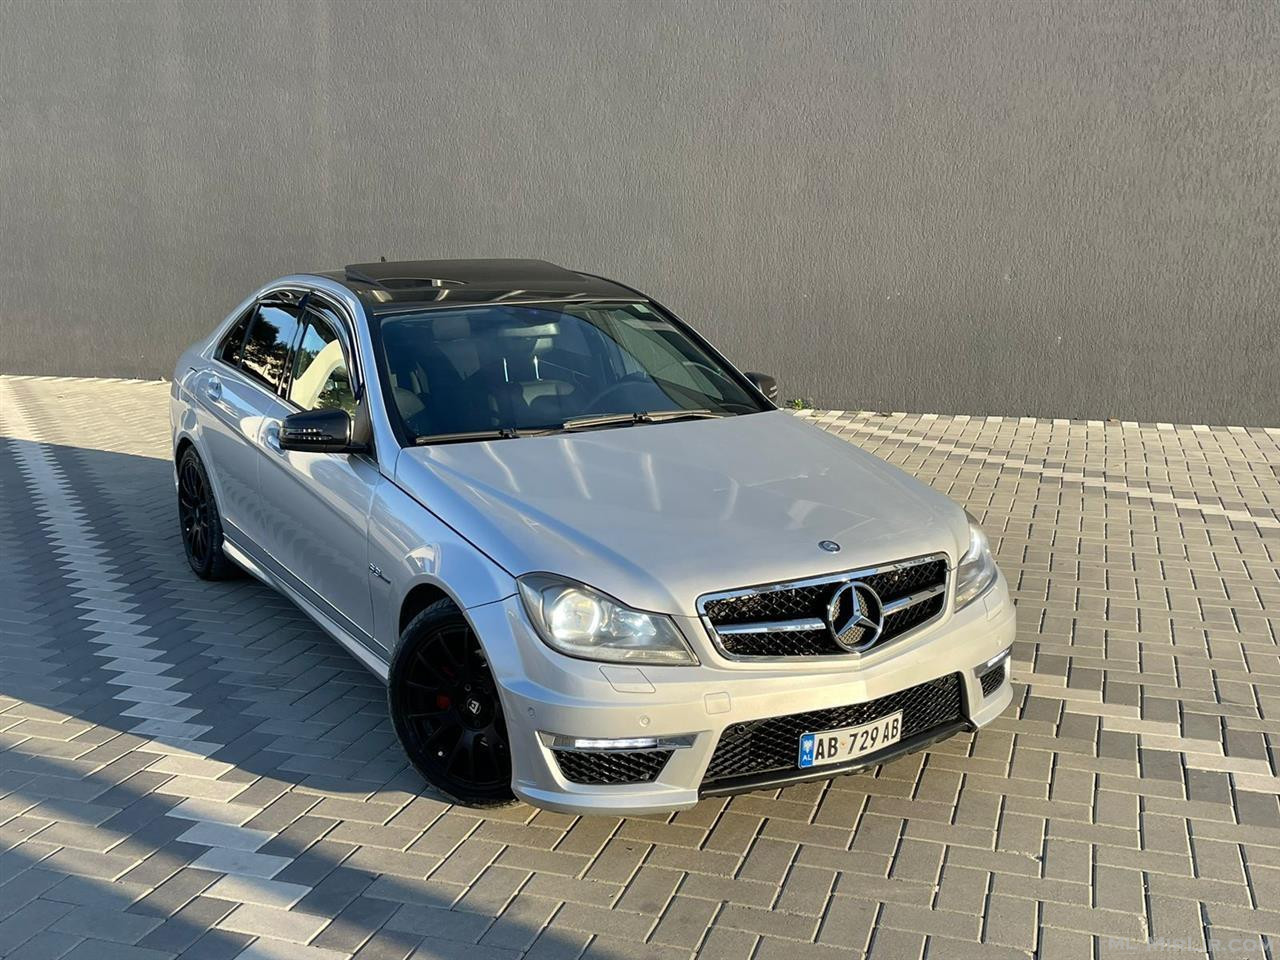 C300 4matic full opsion